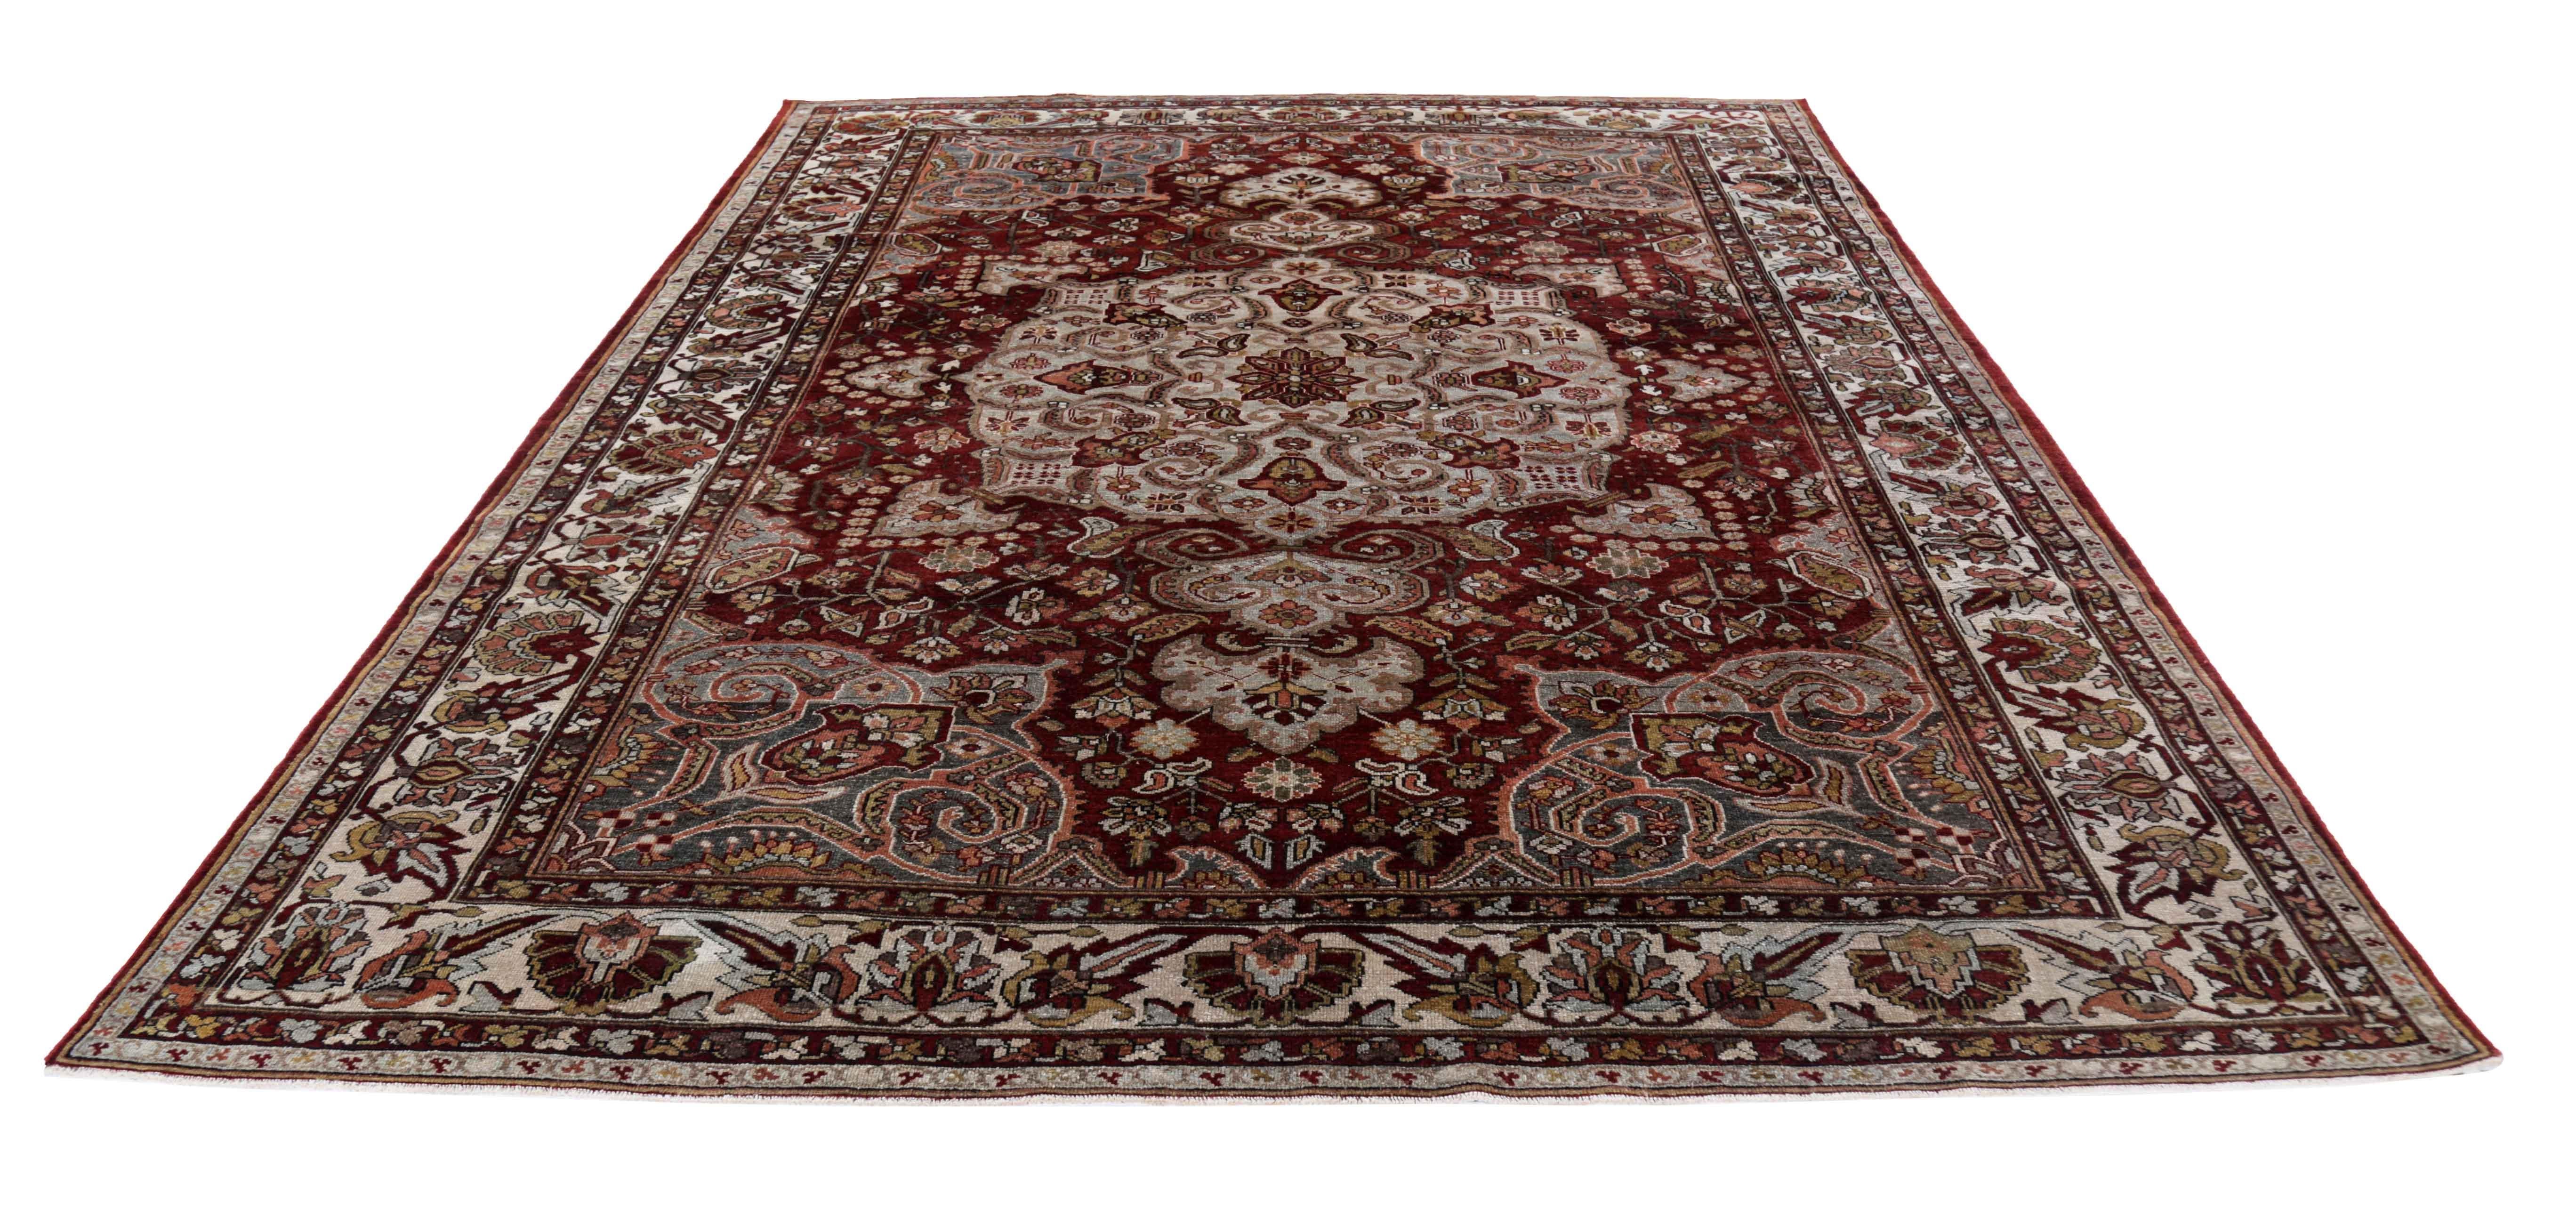 Antique Persian area rug handwoven from the finest sheep’s wool. It’s colored with all-natural vegetable dyes that are safe for humans and pets. It’s a traditional Bakhtiar design handwoven by expert artisans. It’s a lovely area rug that can be